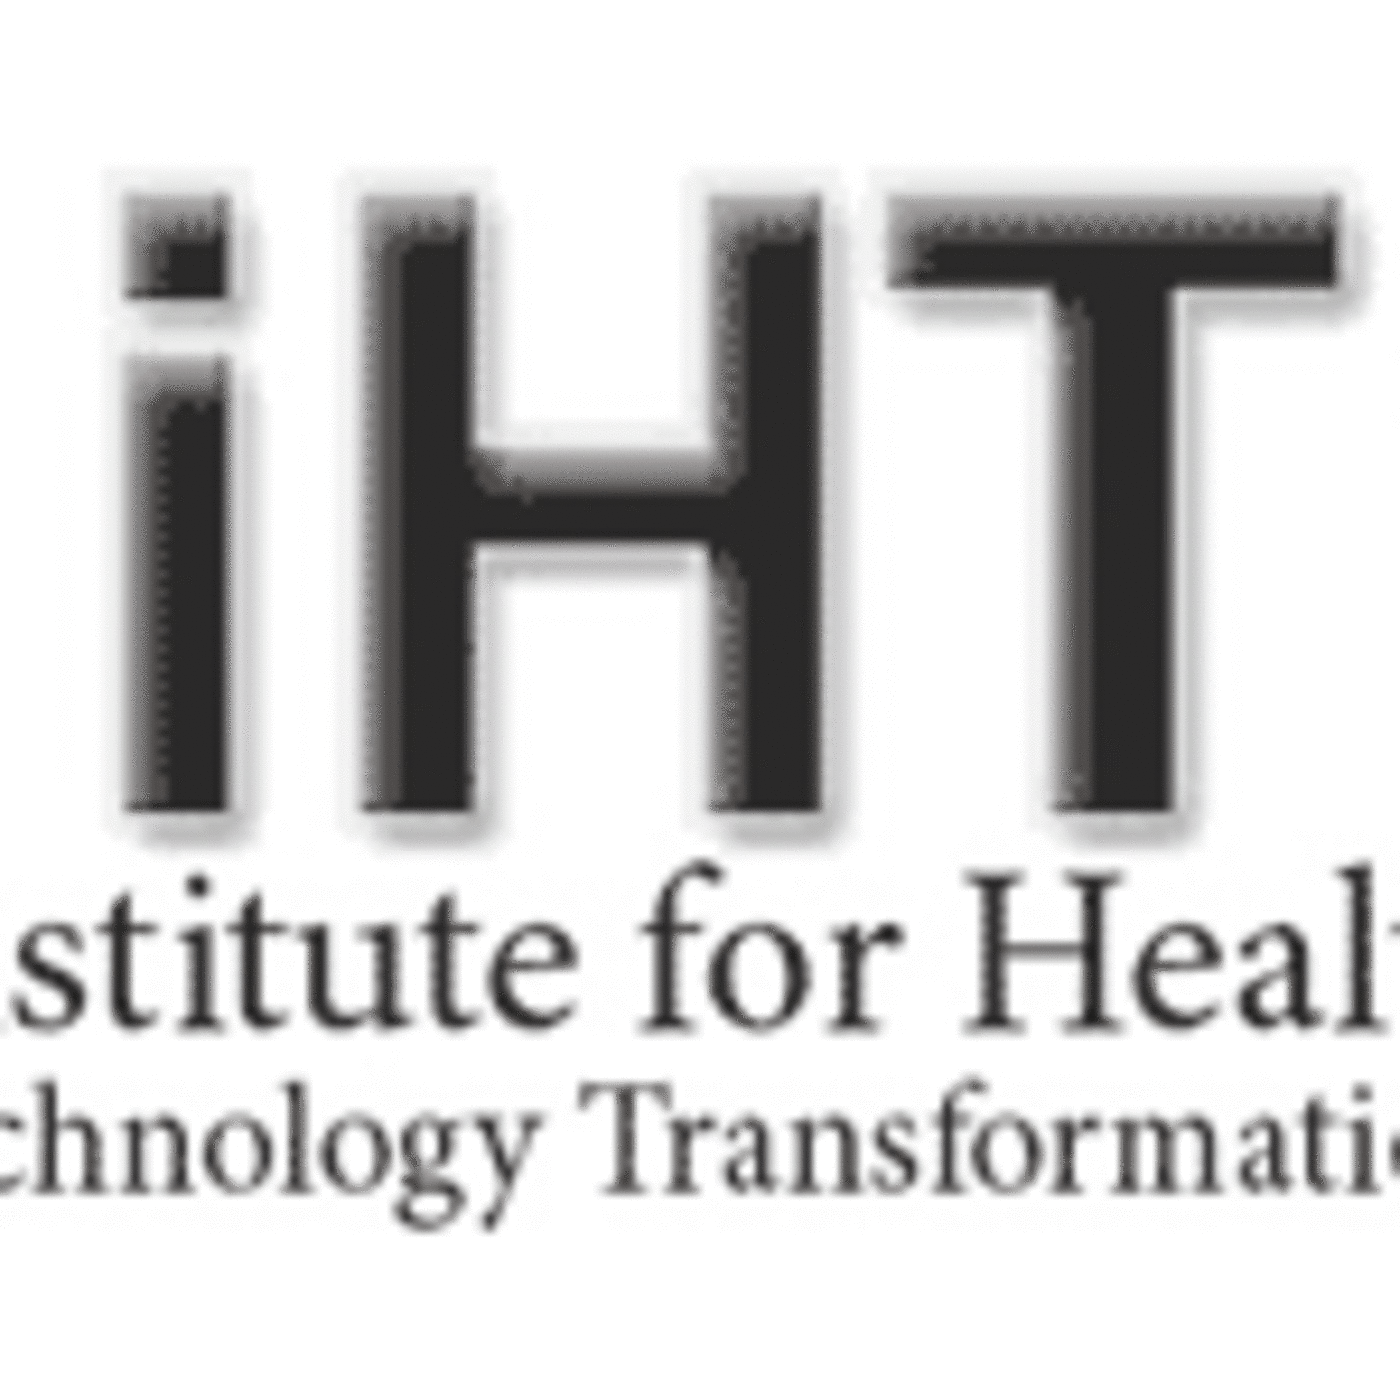 Institute for Health Technology Transformation | iHT² | Health IT | Information Technology